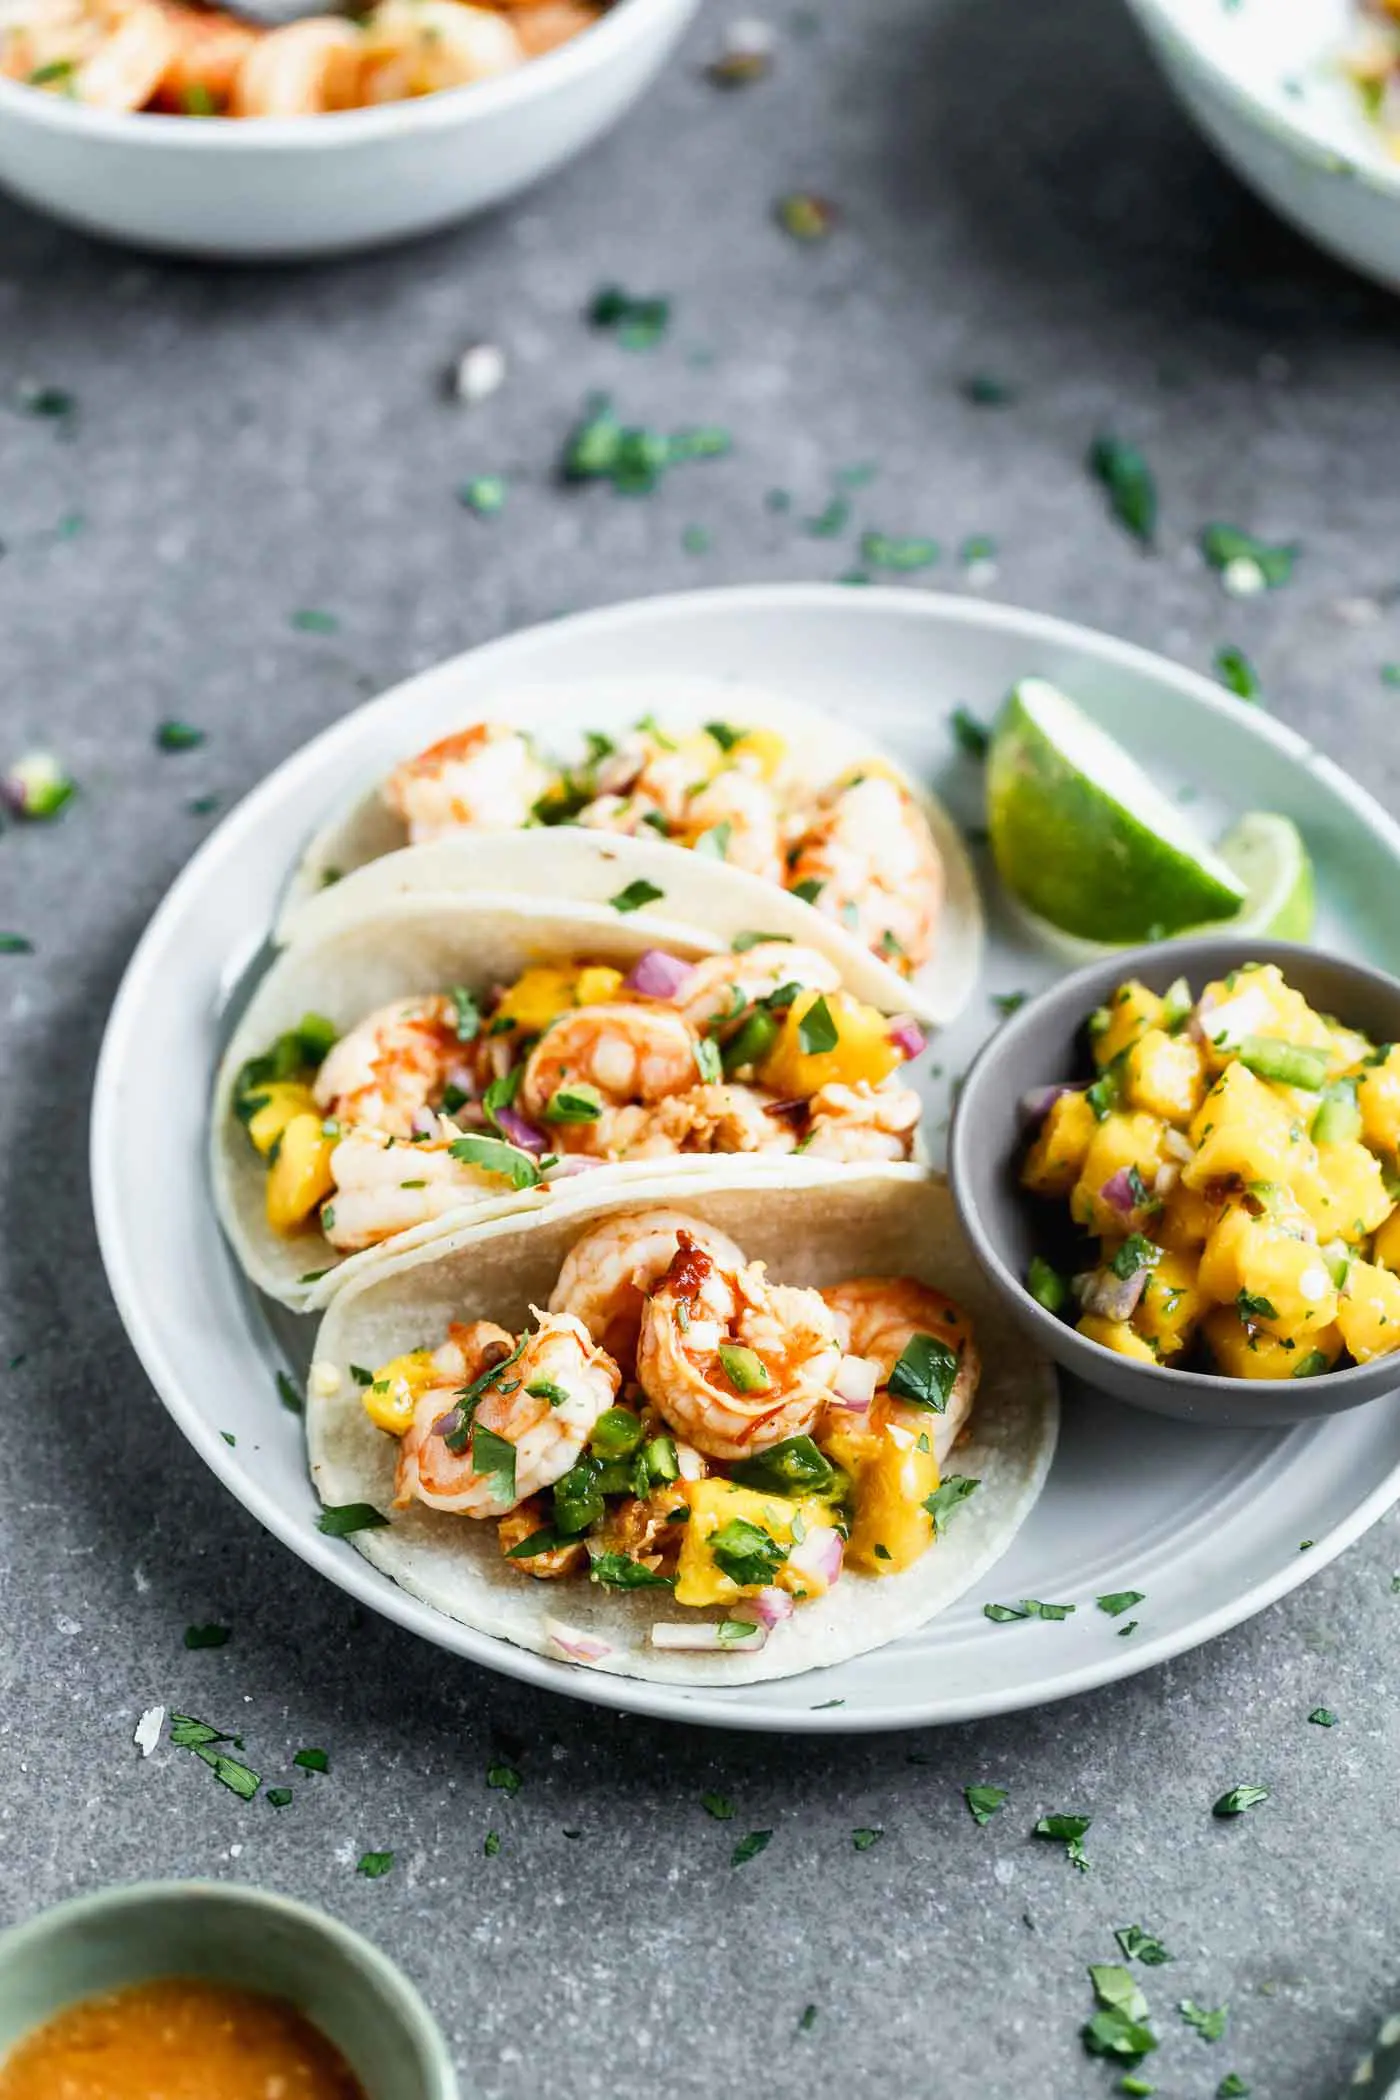 These Easy Chipotle Shrimp Tacos with Mango Salsa are perfect for breezy summer lunches, healthy dinners, or any kind of celebration. Plump shrimp are flavored with chipotle peppers, lime juice, and honey, baked and nestled into corn tortillas (or lettuce wraps!). Each taco is topped off with a quick homemade mango salsa, a little bit of cilantro, and ready to be served!